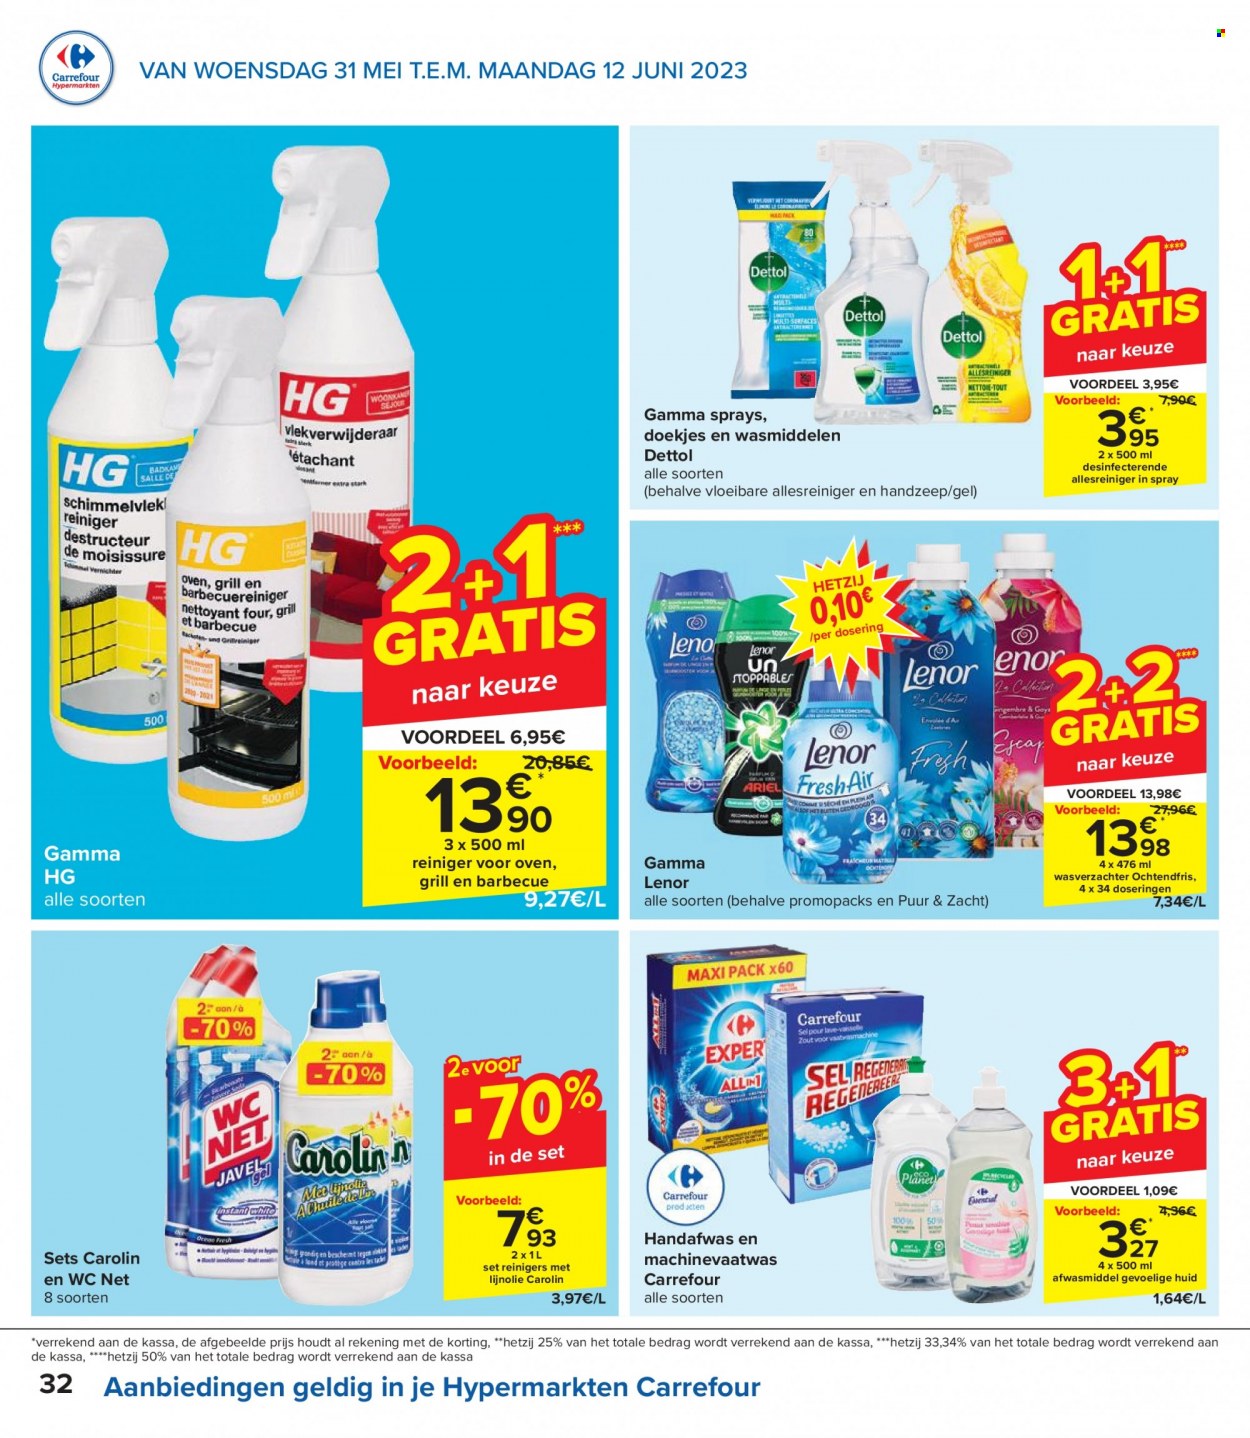 Catalogue Carrefour hypermarkt - 31.5.2023 - 12.6.2023. Page 32.